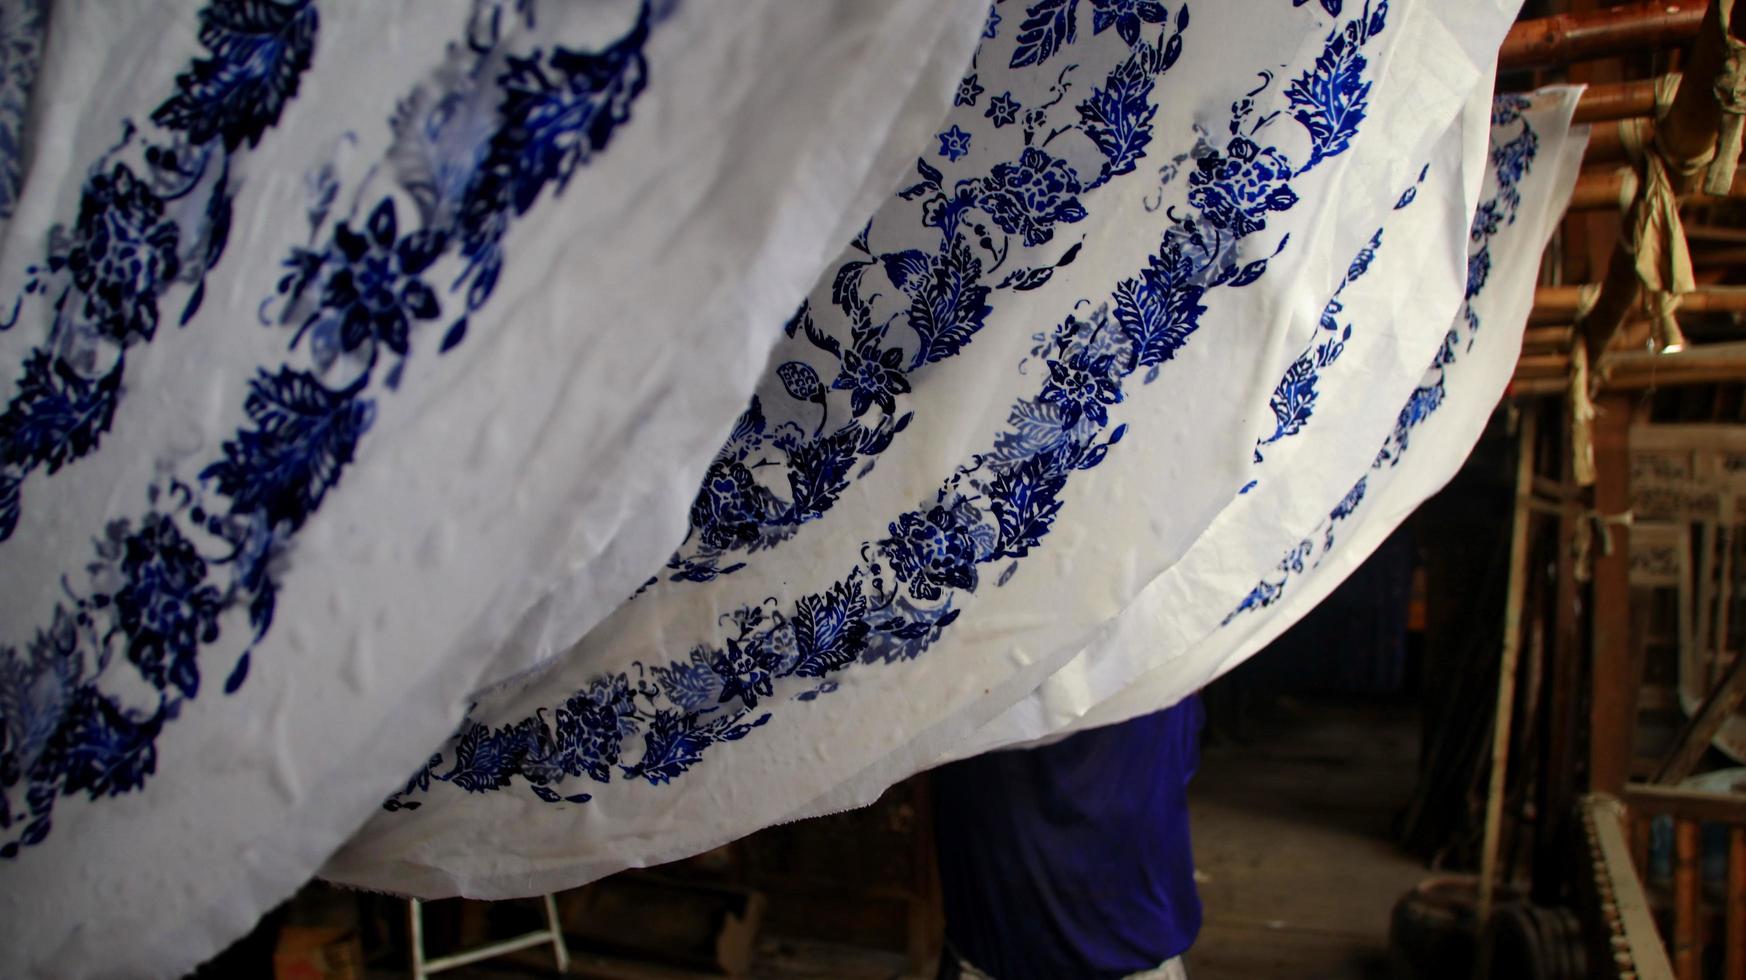 Activity of making batik,  Create and design white fabric using canting and wax by slamming over the fabric, Pekalongan, Indonesia, March 7, 2020 photo